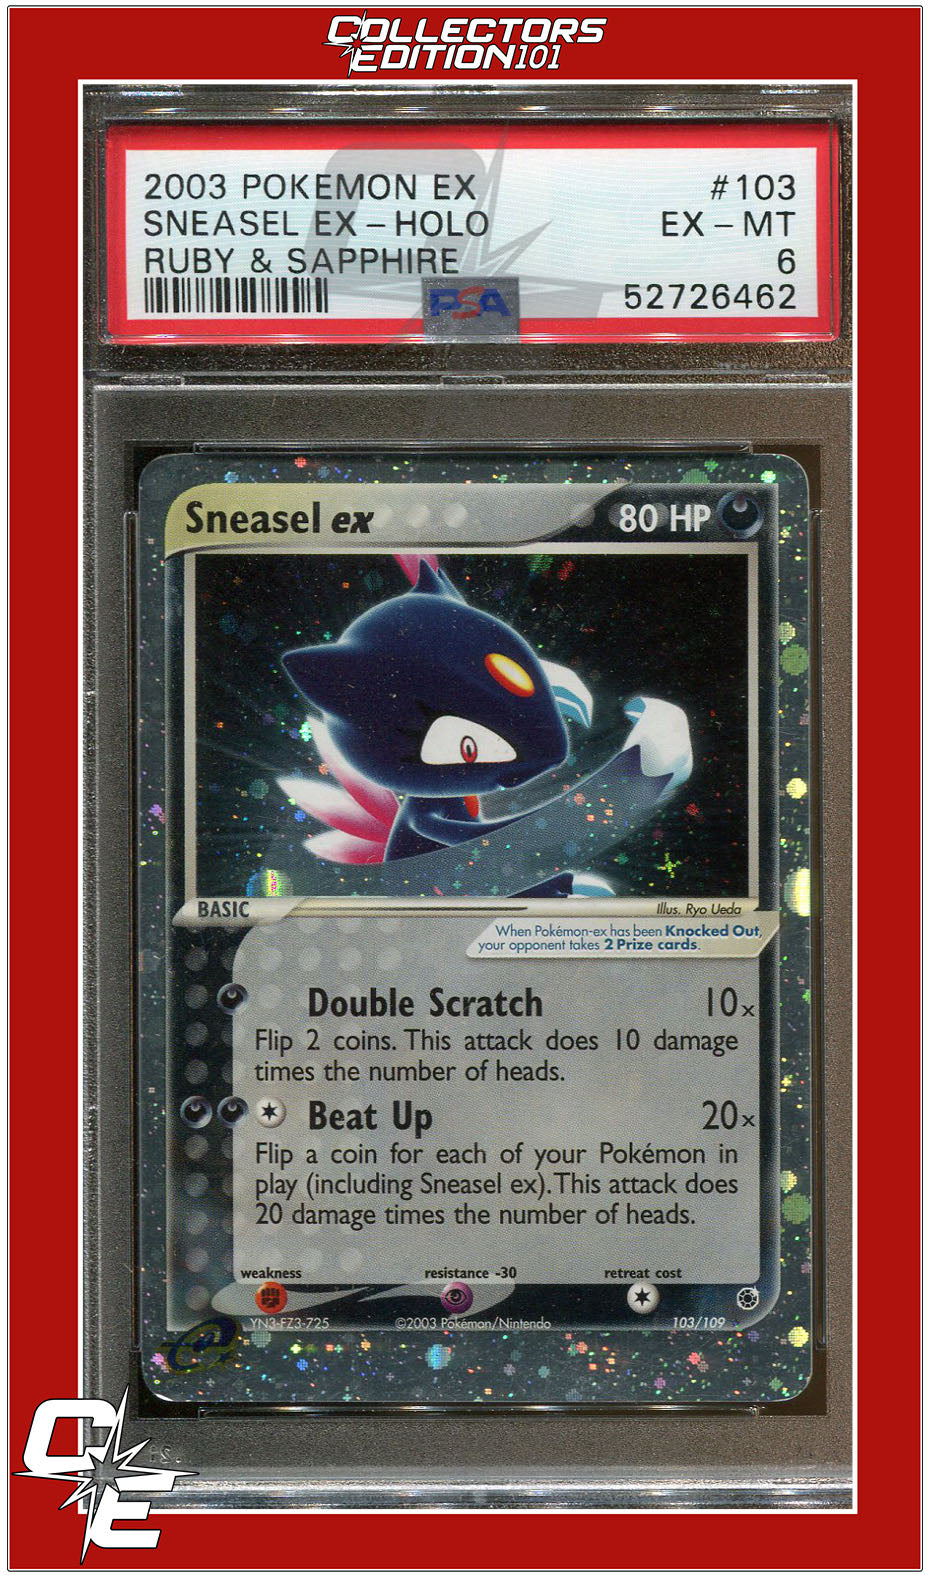 EX Ruby & Sapphire 103 Sneasel EX Holo PSA 6